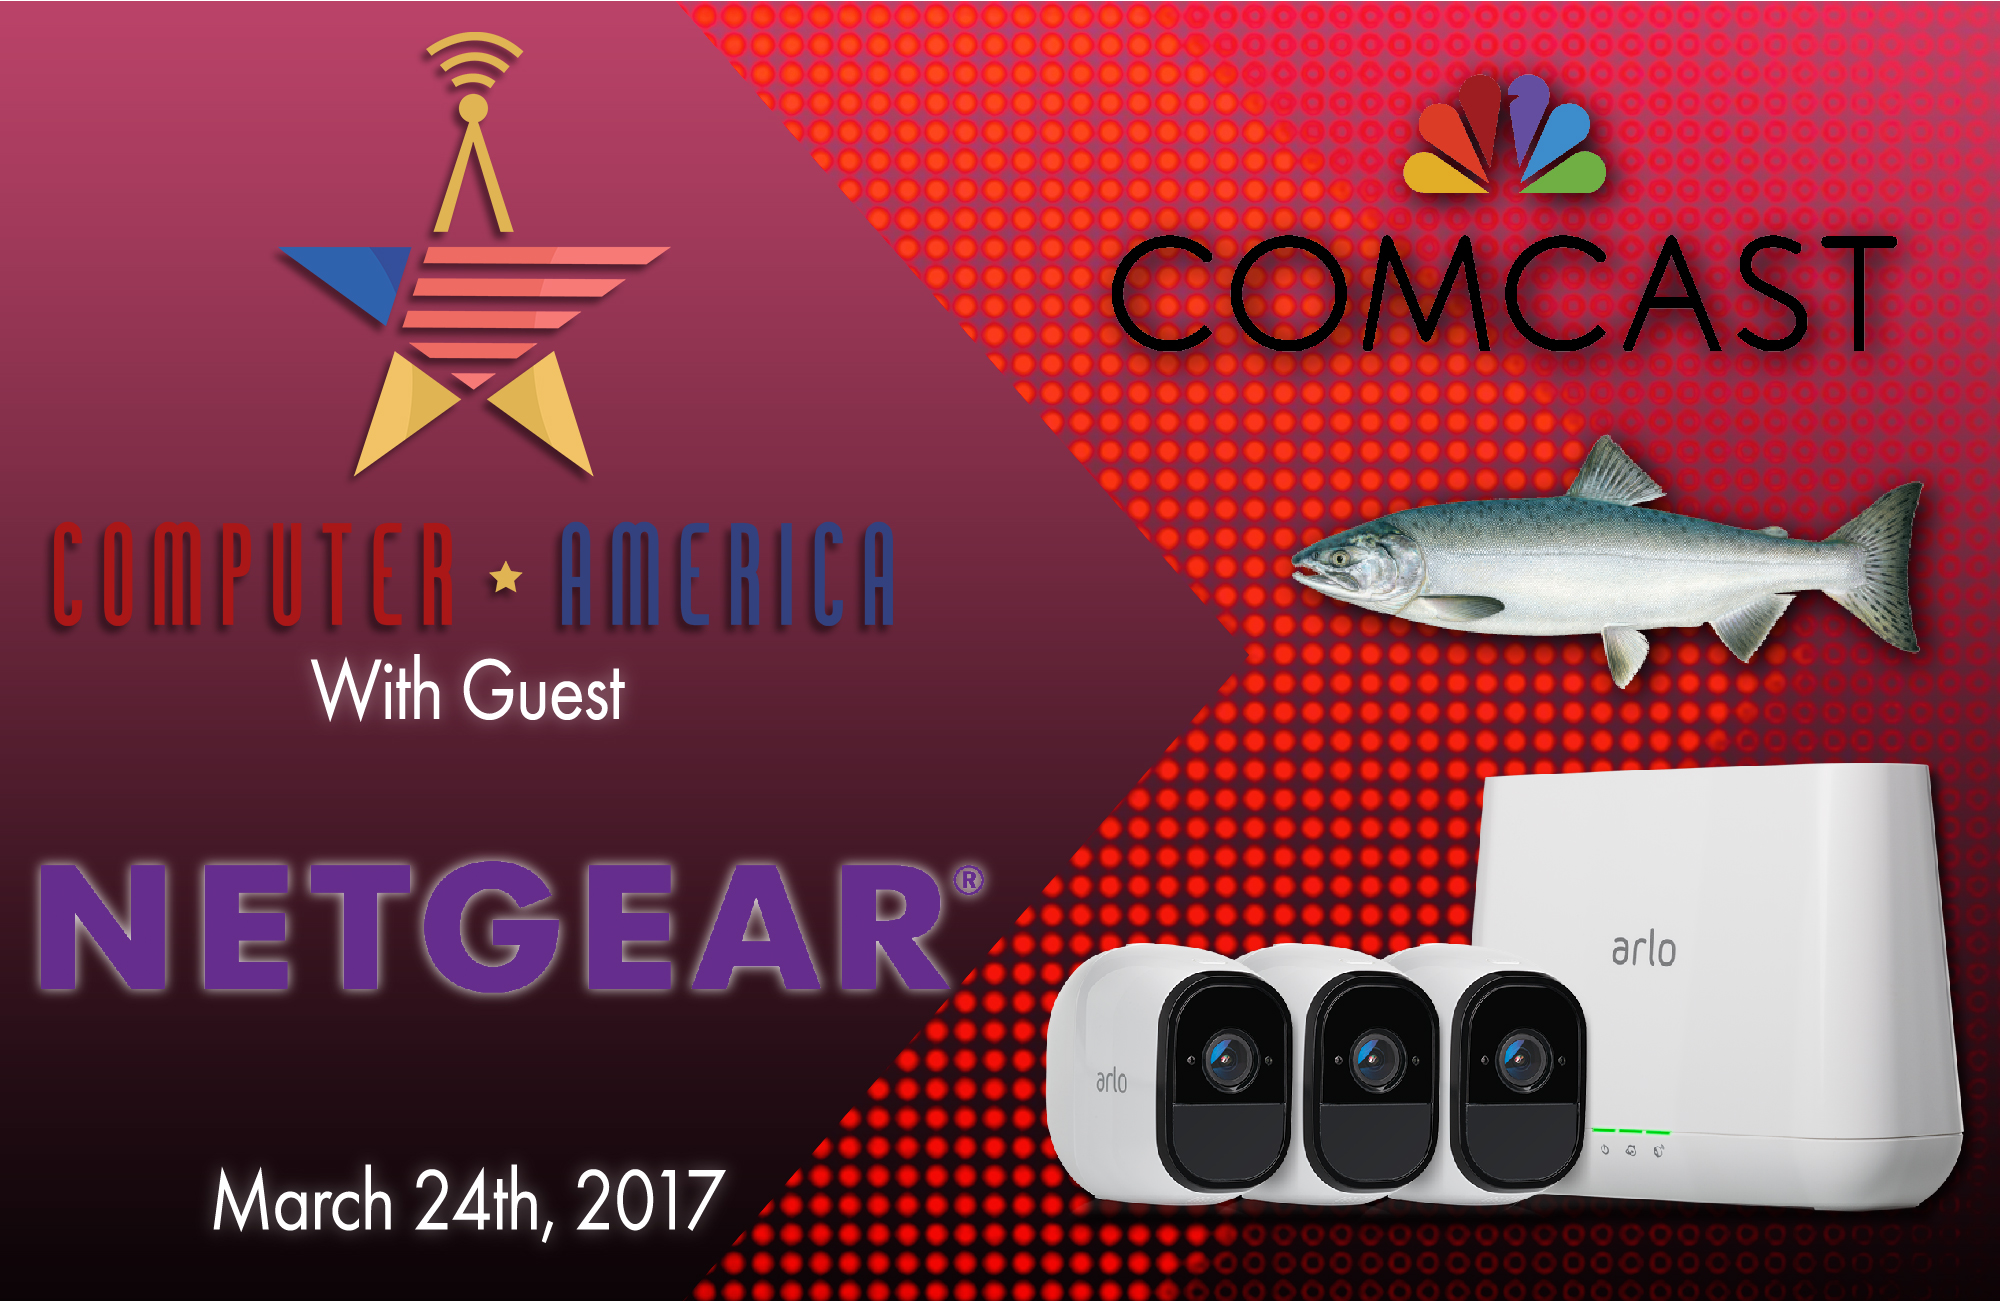 NETGEAR Arlo Interview, Salmon Blasting Laser Cleaners, New FCC Rules, And Comcast Streams